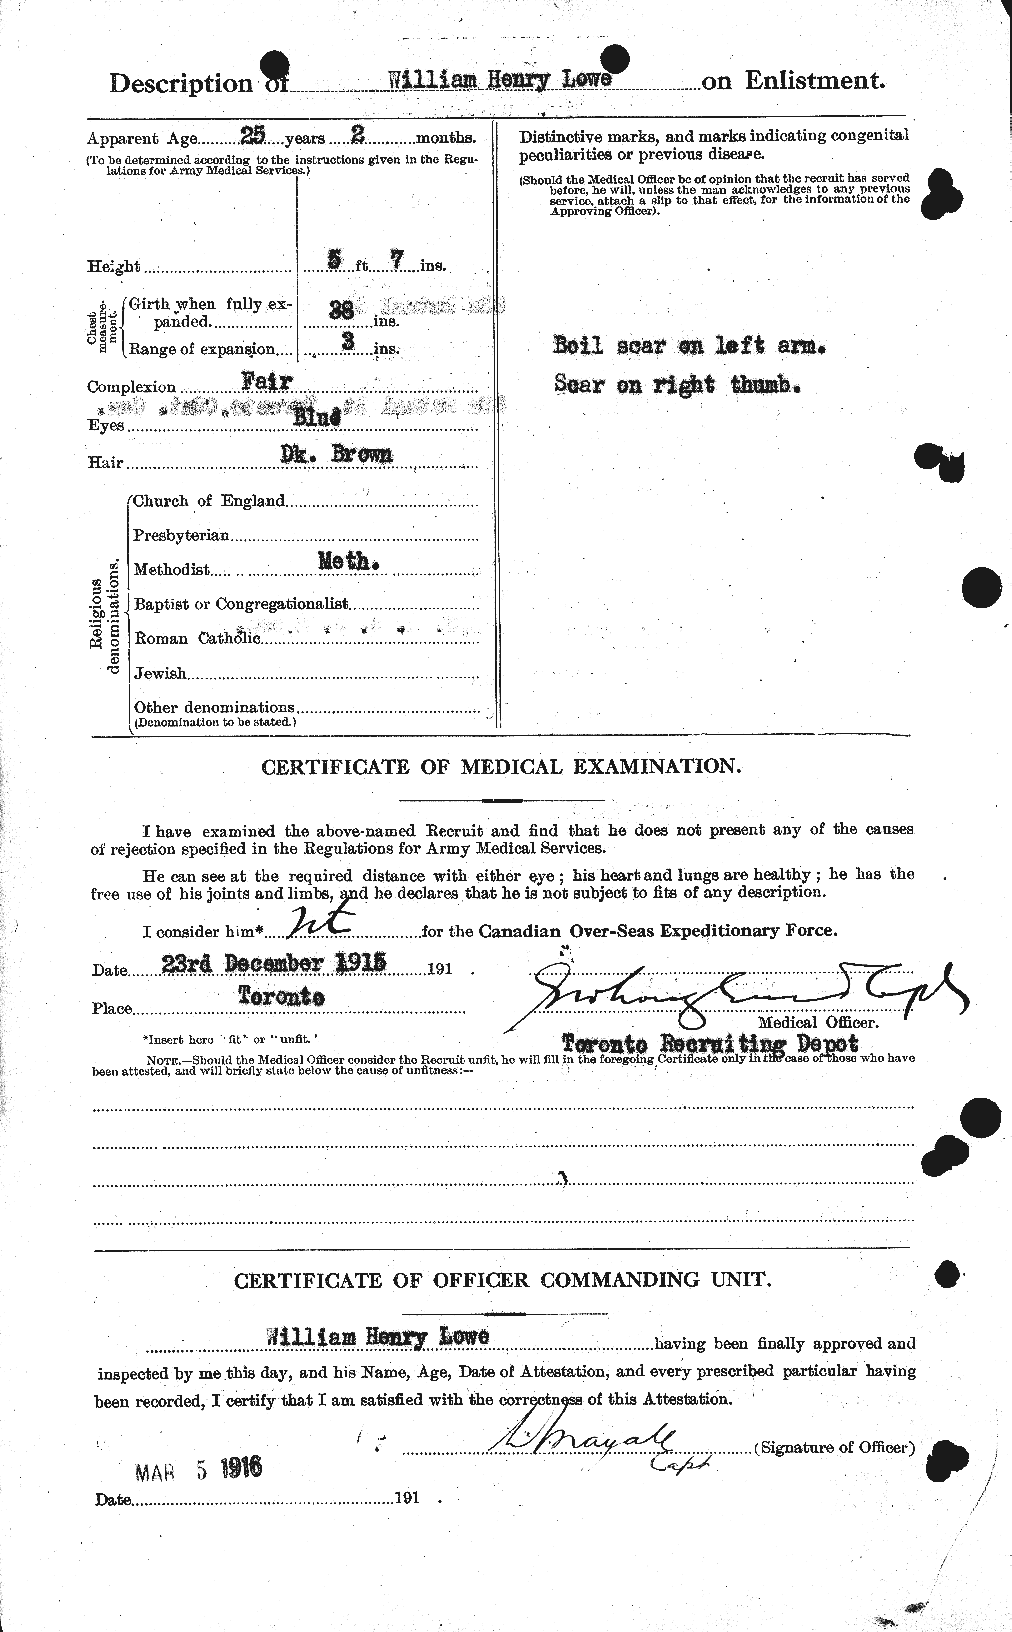 Personnel Records of the First World War - CEF 471231b